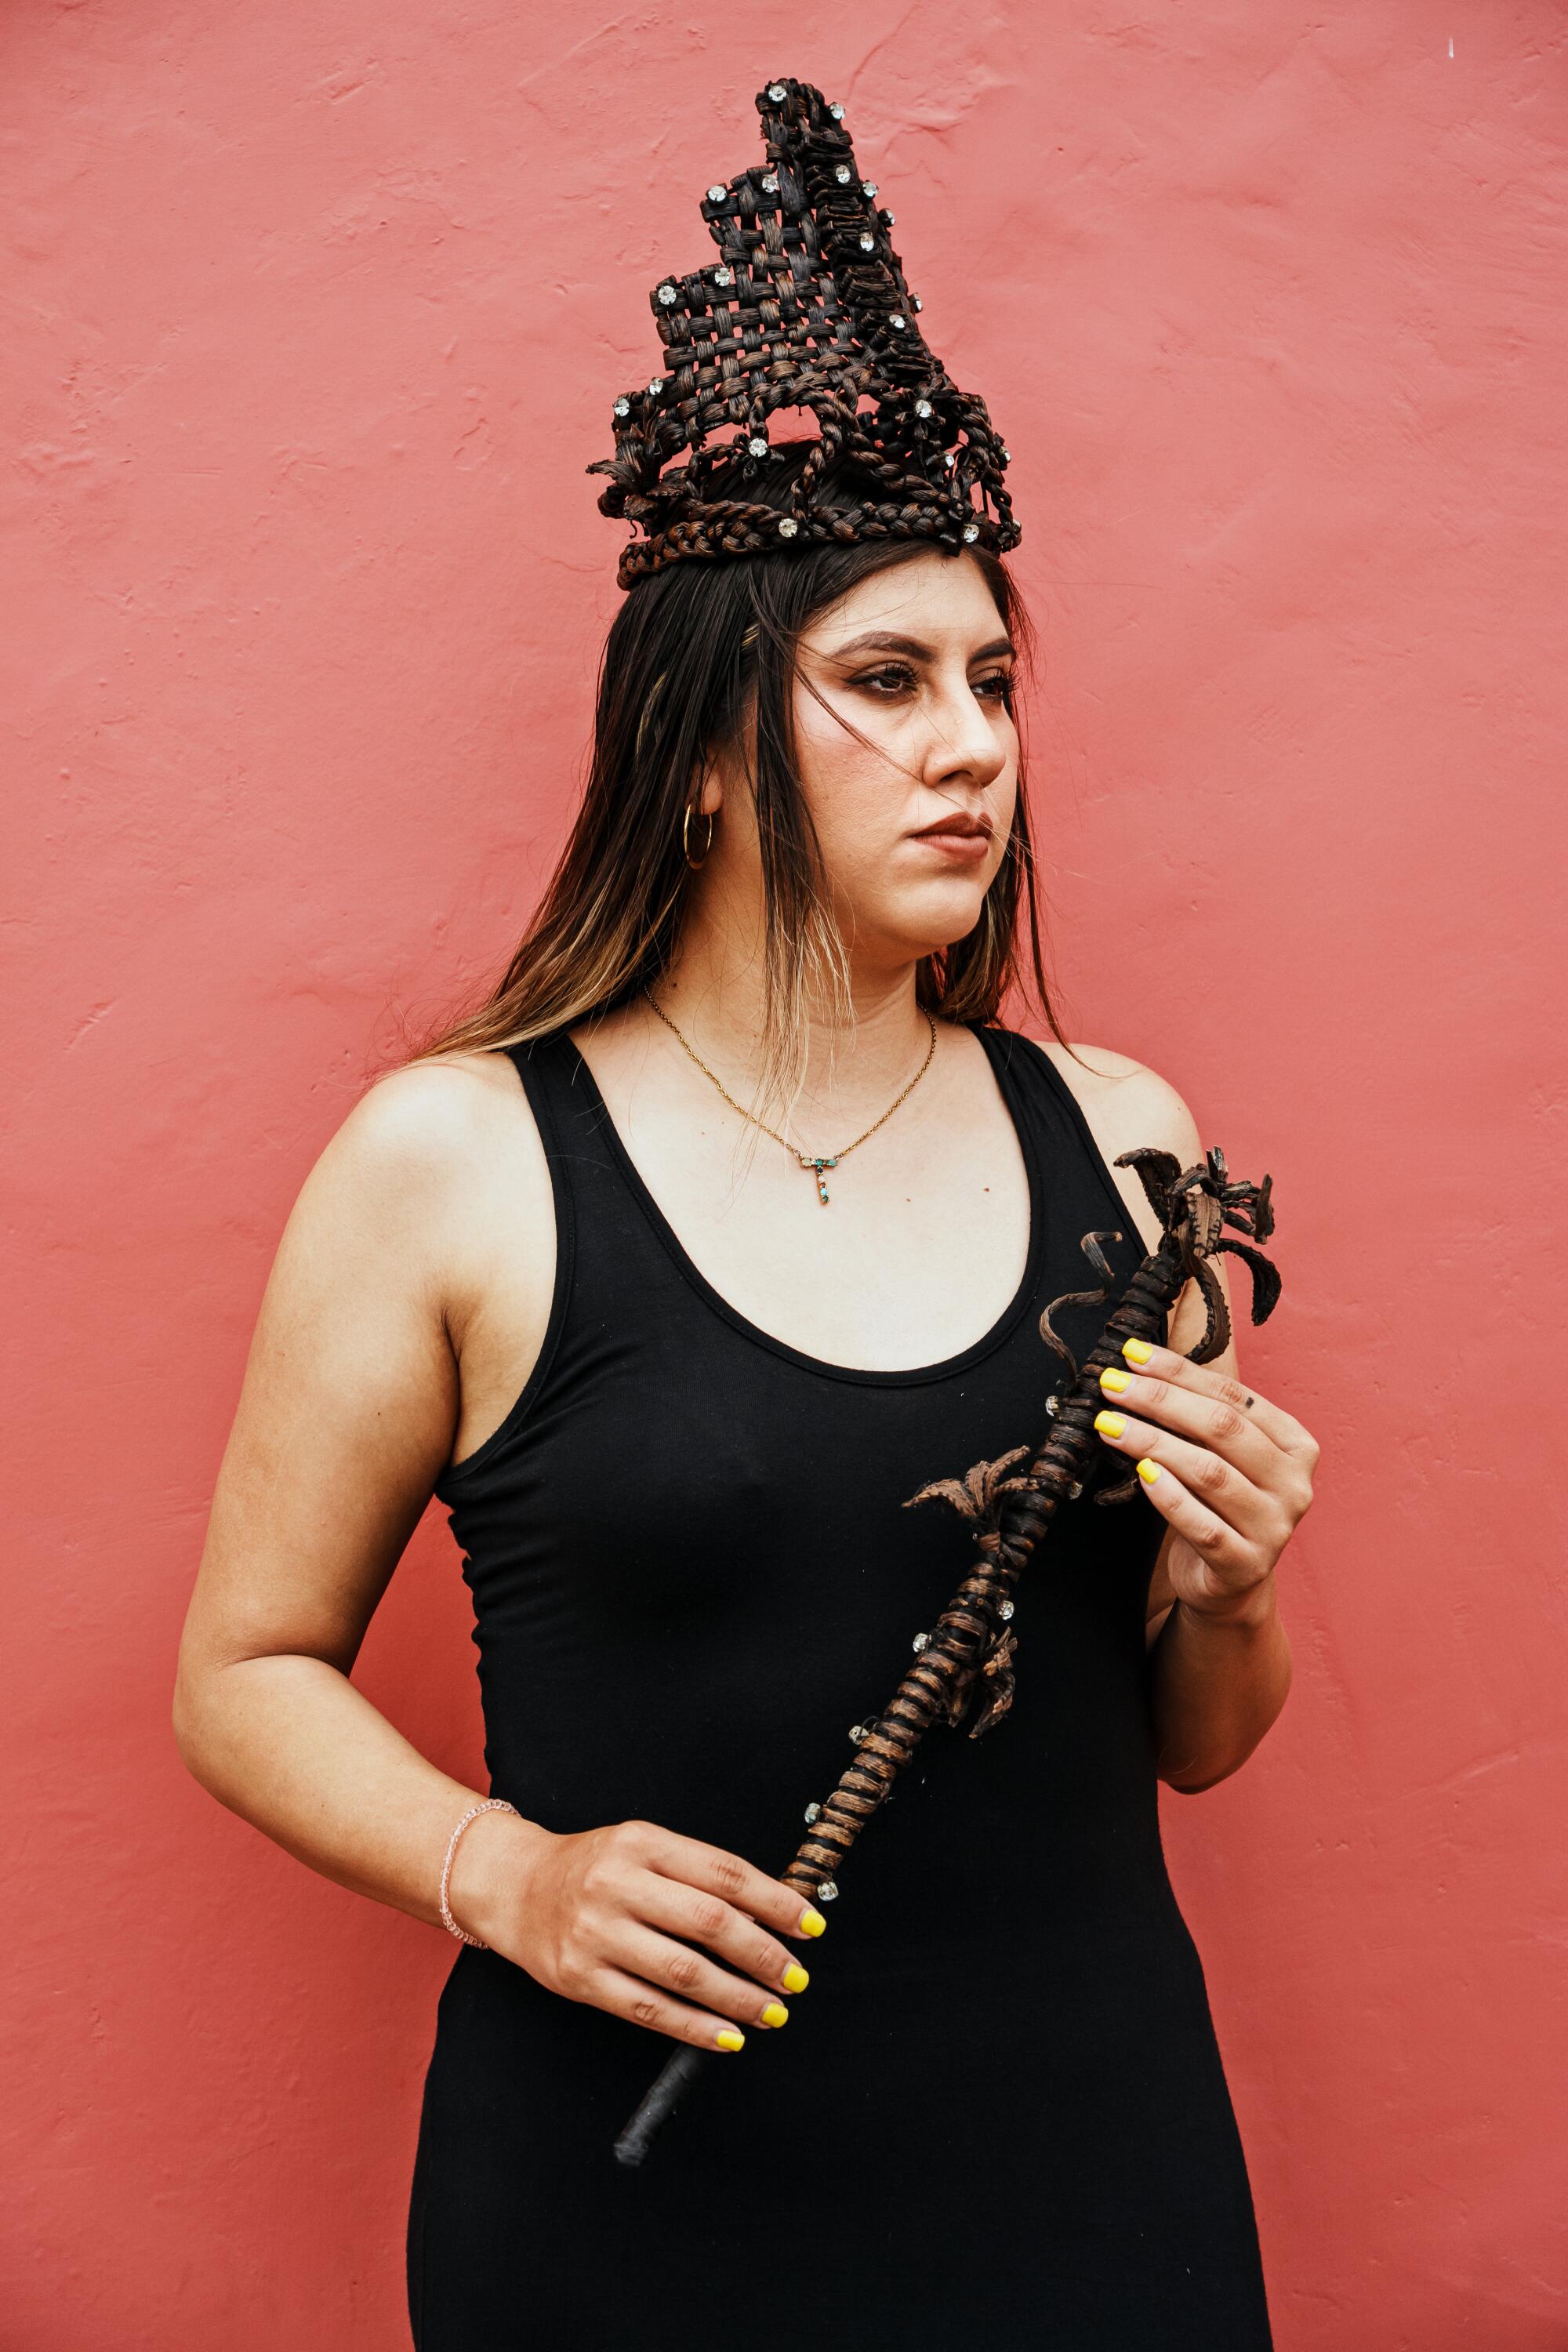 Tania Zayas, 26, poses for a portrait with her crown and vanilla wand.